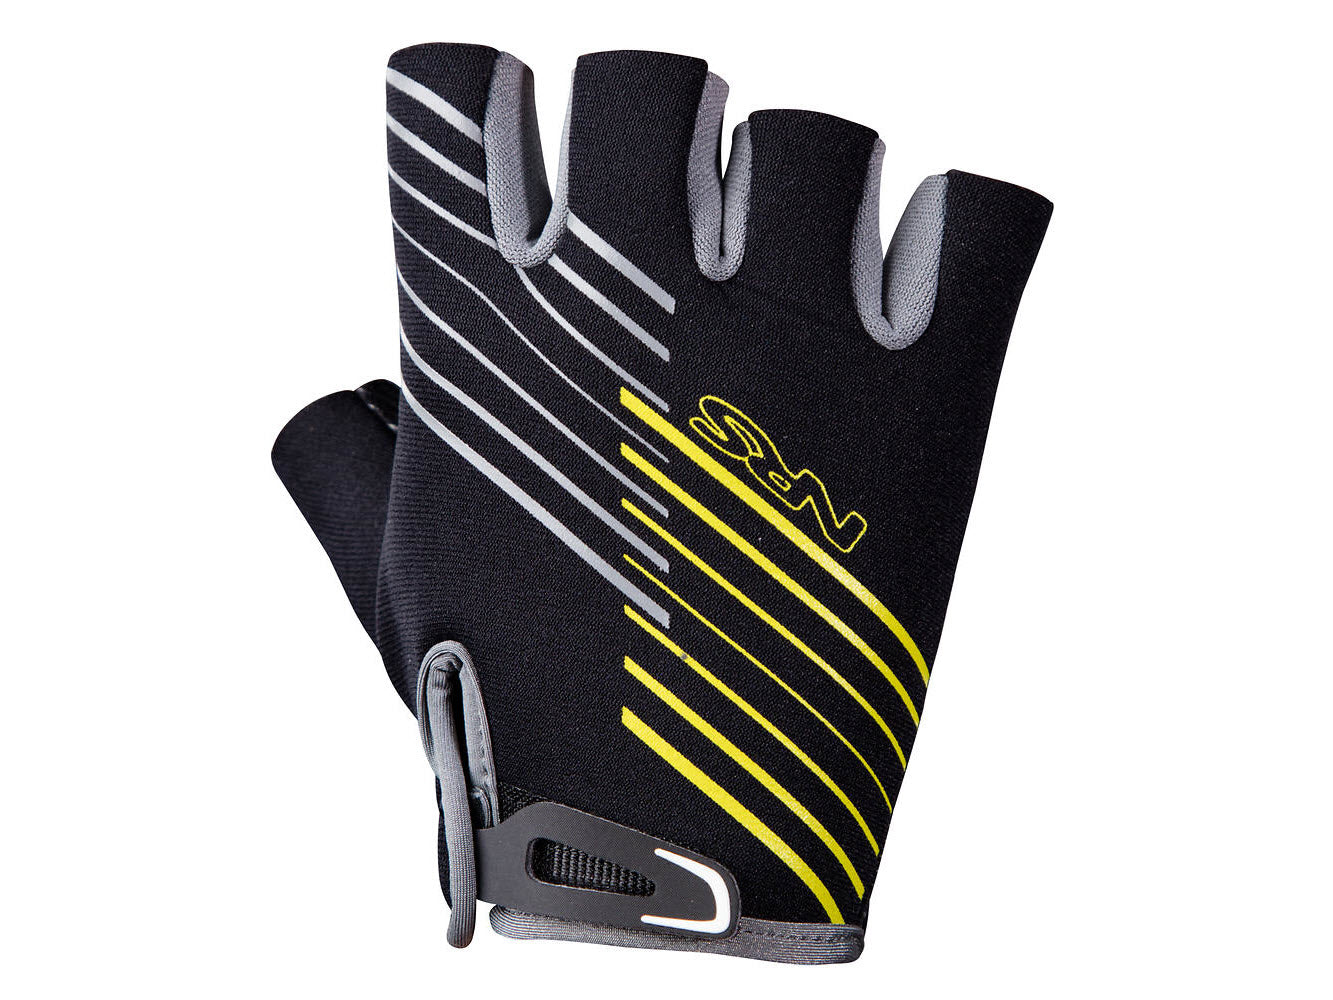 NRS Guide Glove Top